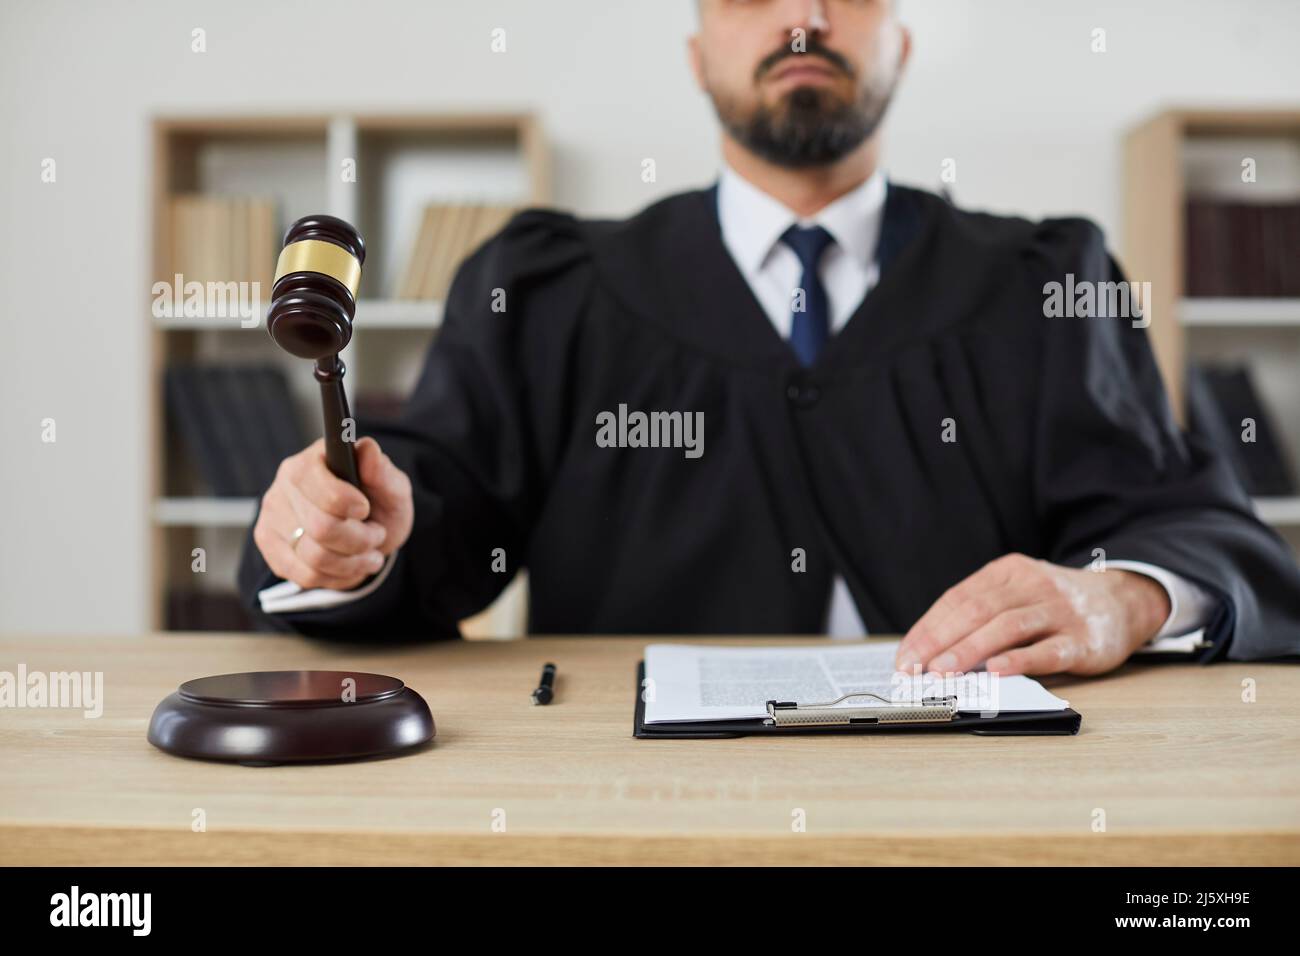 Male judge who passes sentence and announces closure of case by hitting gavel on sounding block. Stock Photo